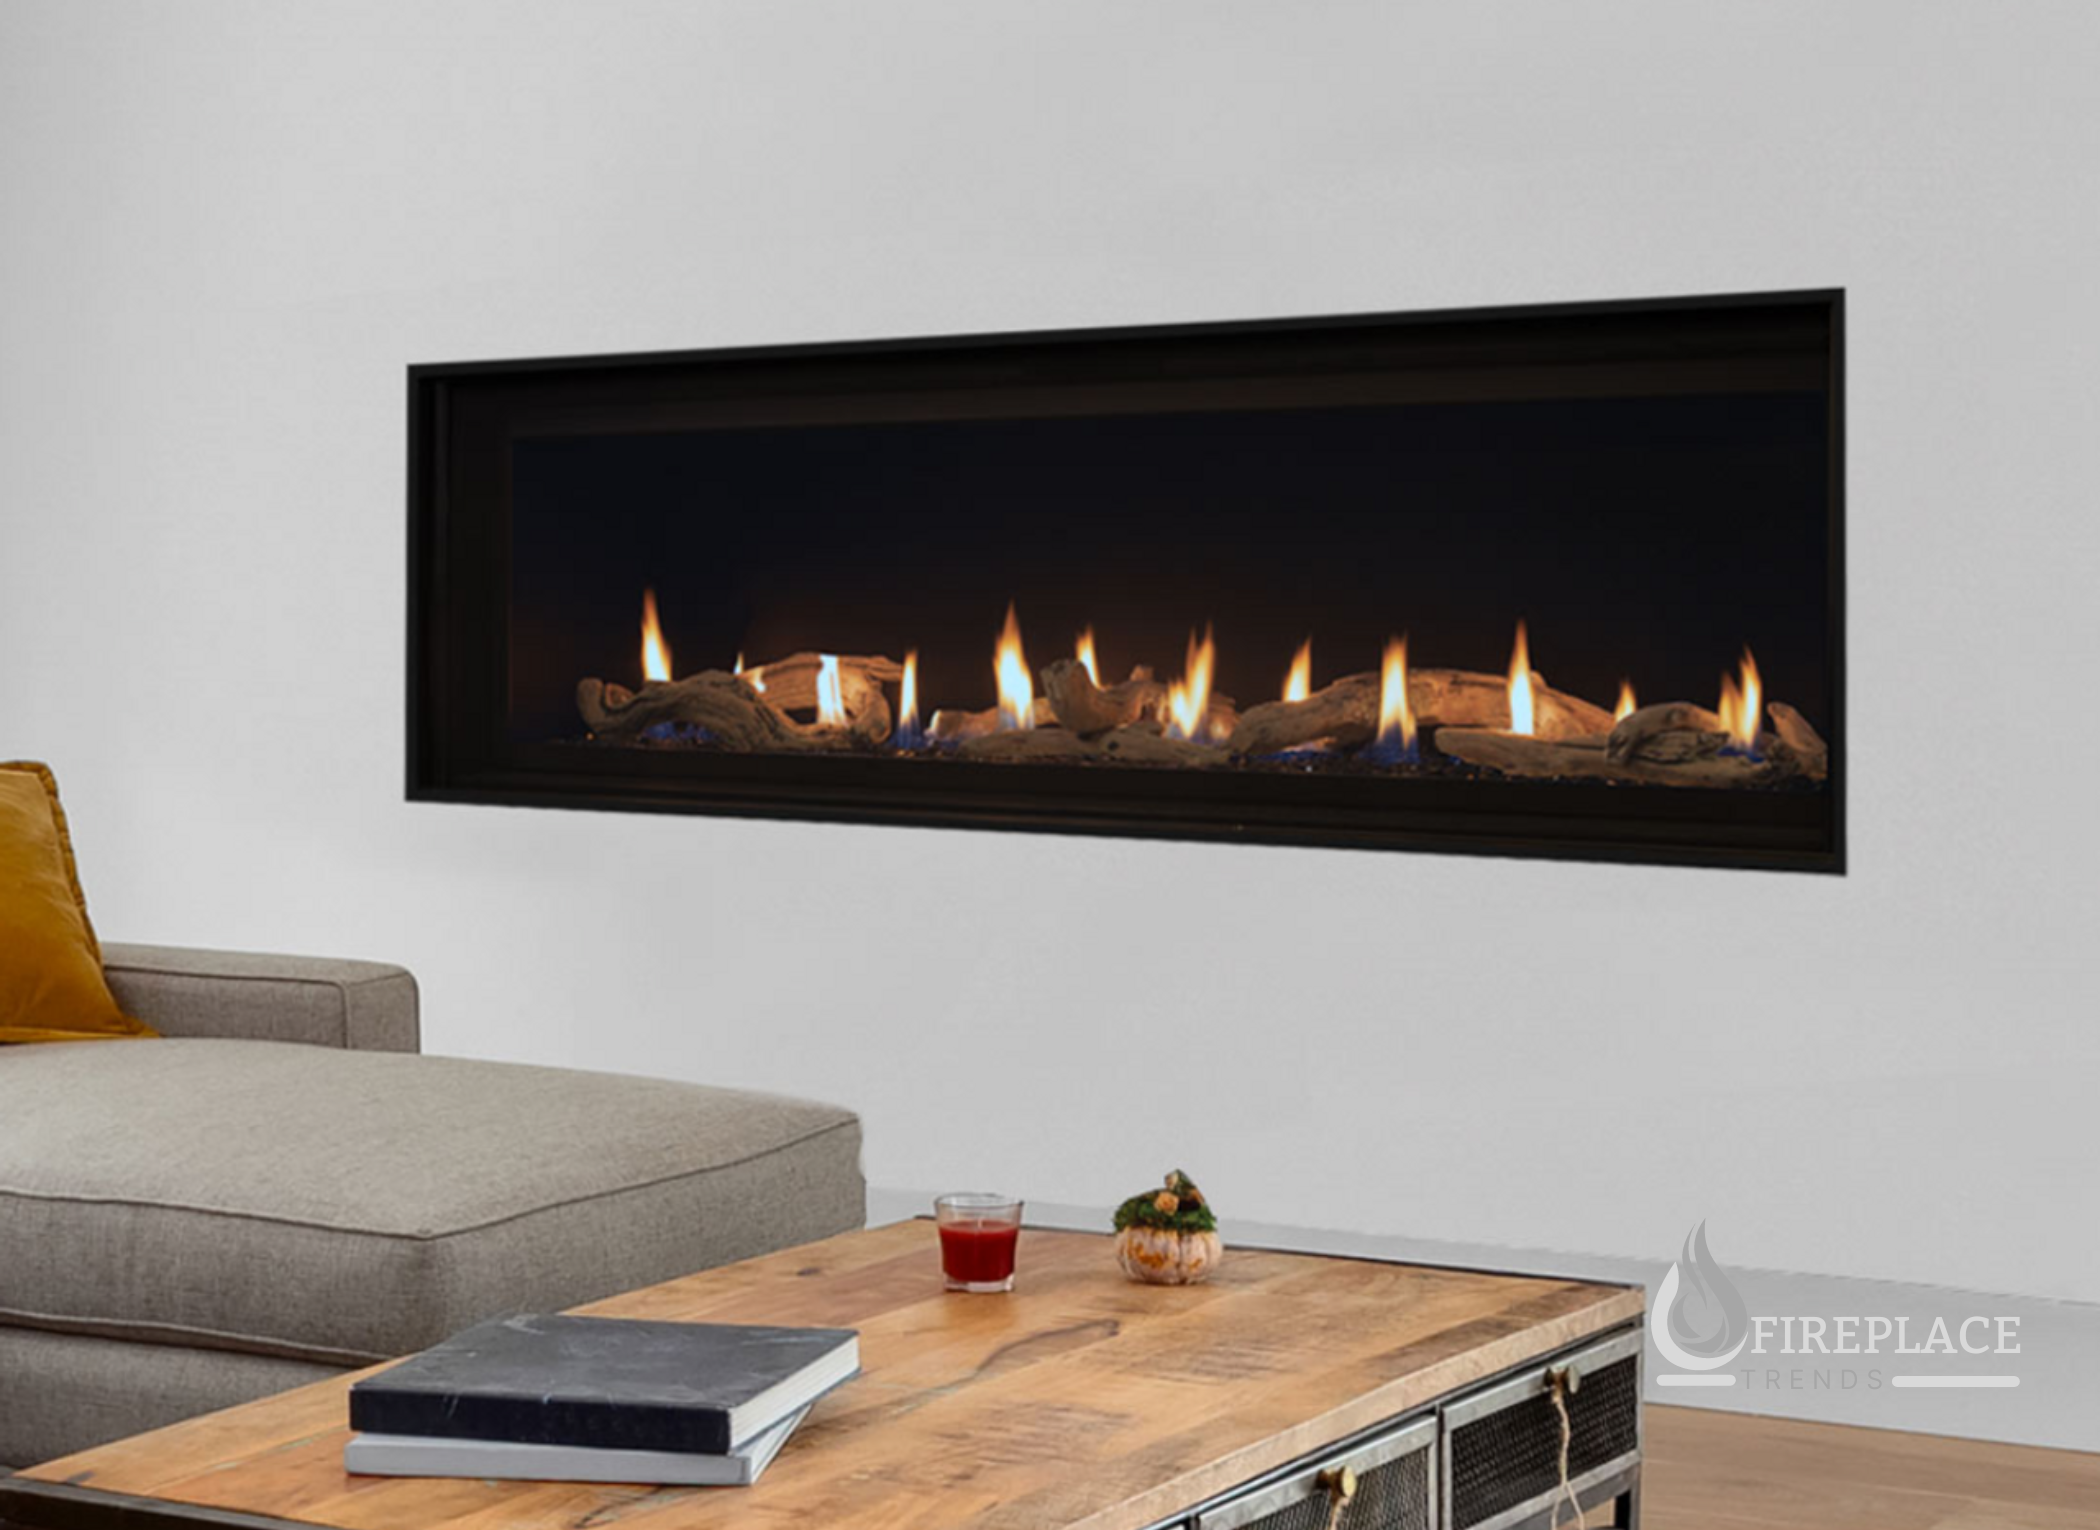 Superior - 48" - Electronic Ignition Direct Vent Linear Gas Fireplace - DRL 4000 Series